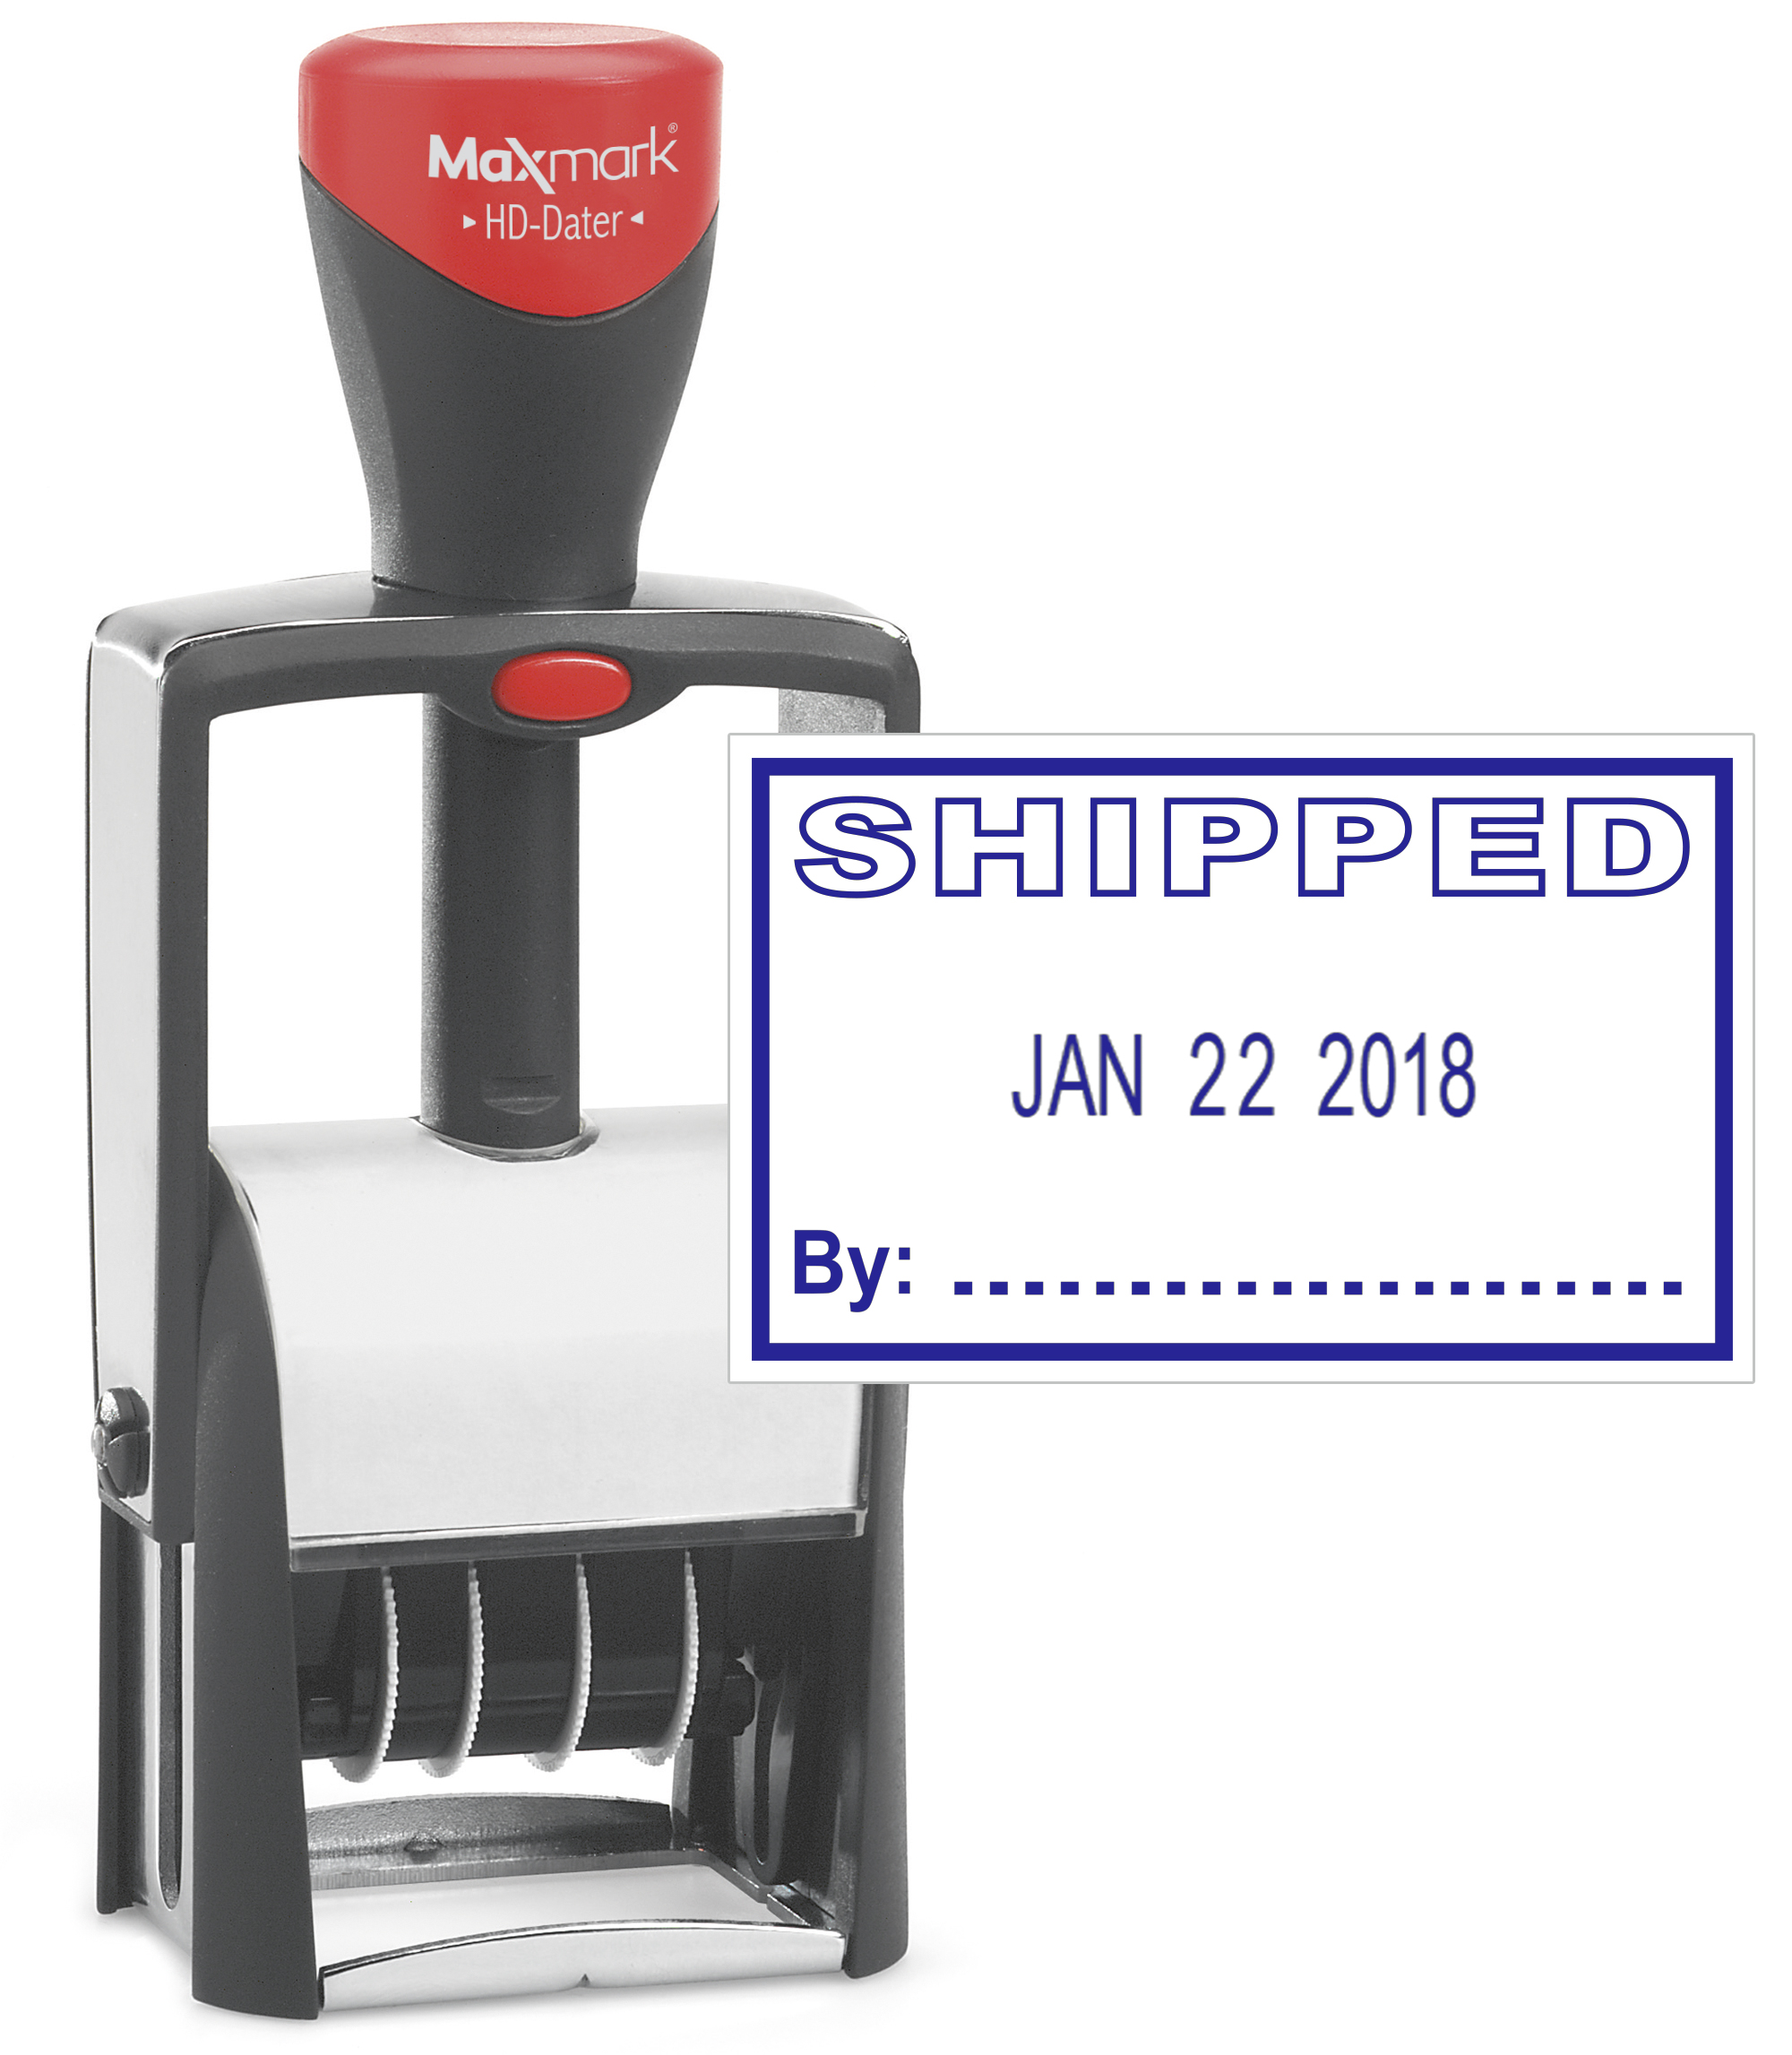 Heavy Duty Date Stamp with "SHIPPED" Self Inking Stamp - BLUE Ink